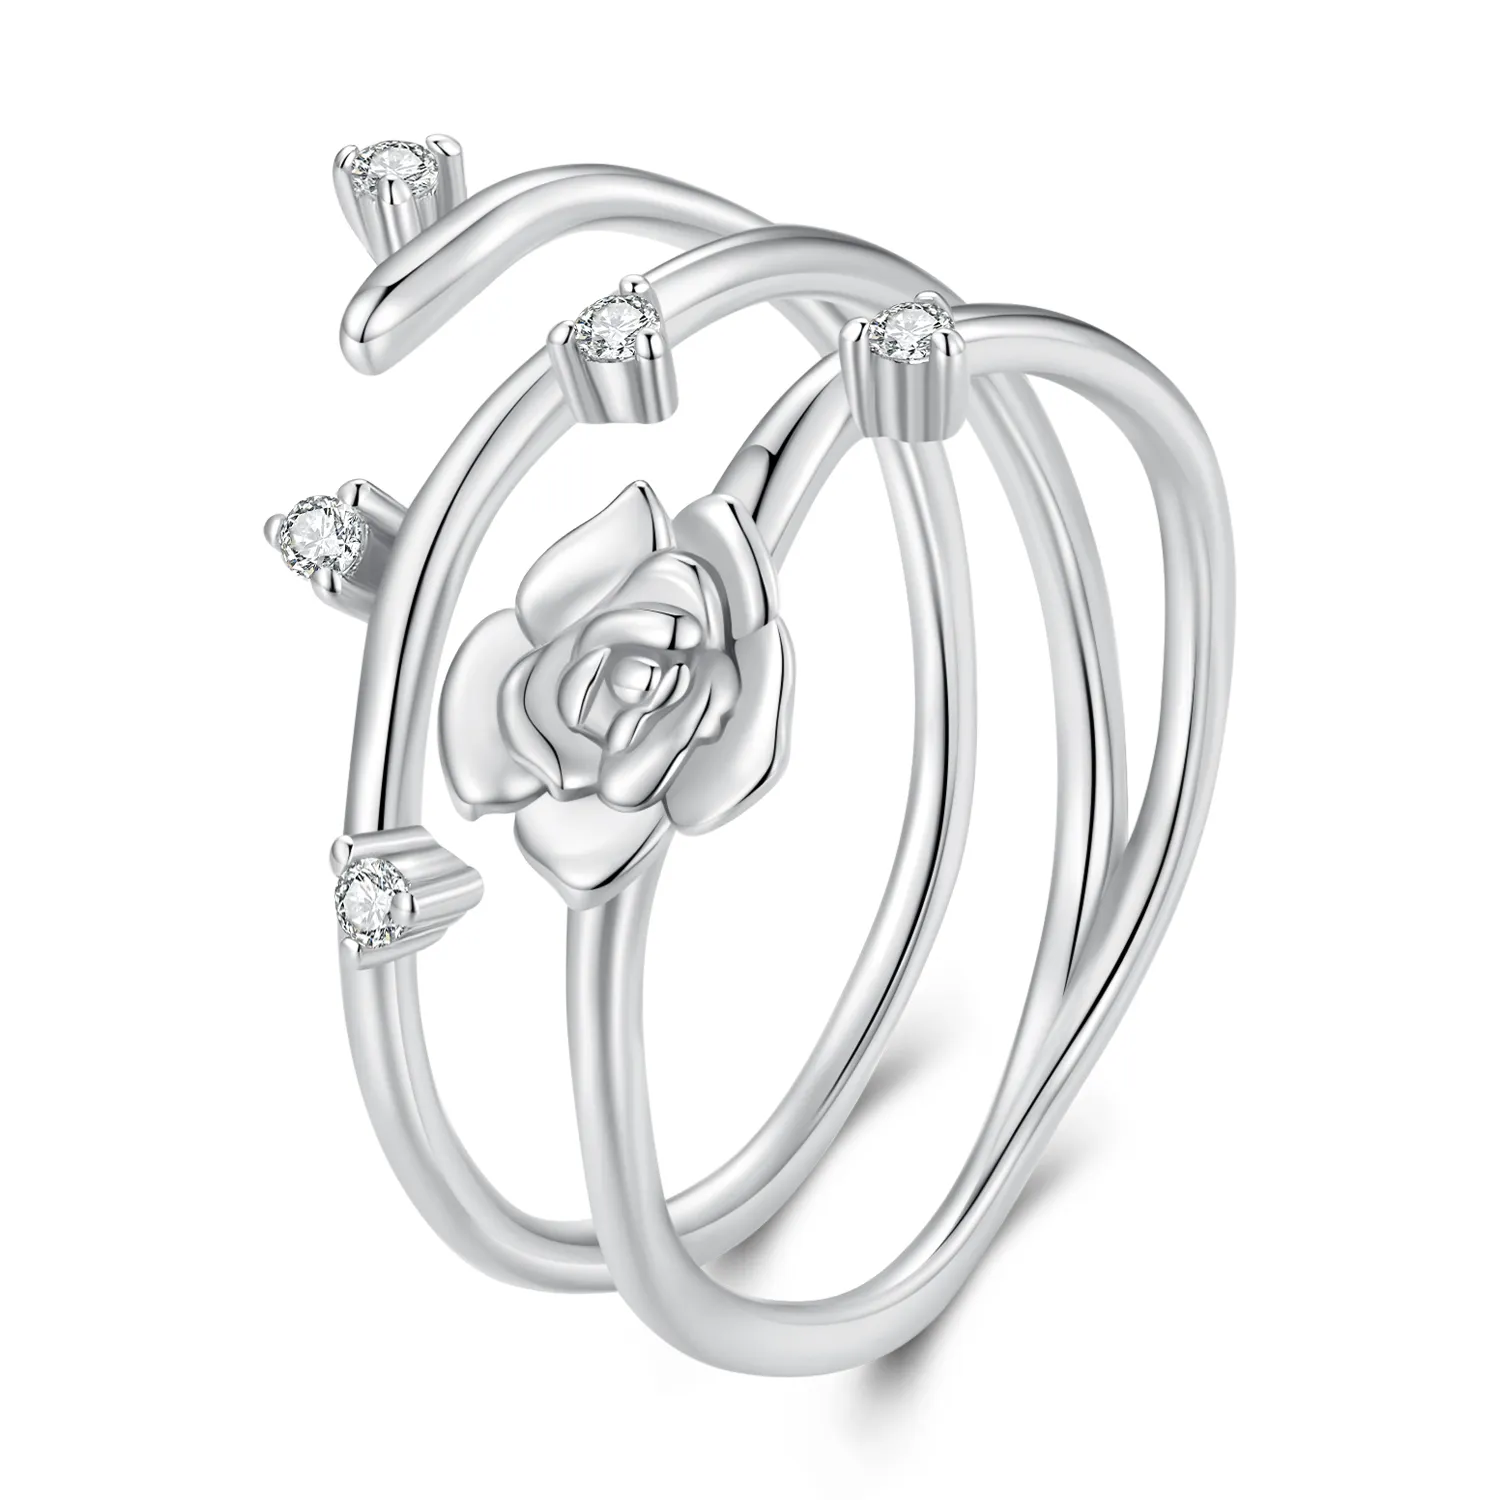 S925 sterling silver personalized rose vine jewelry gifts finger ring for women